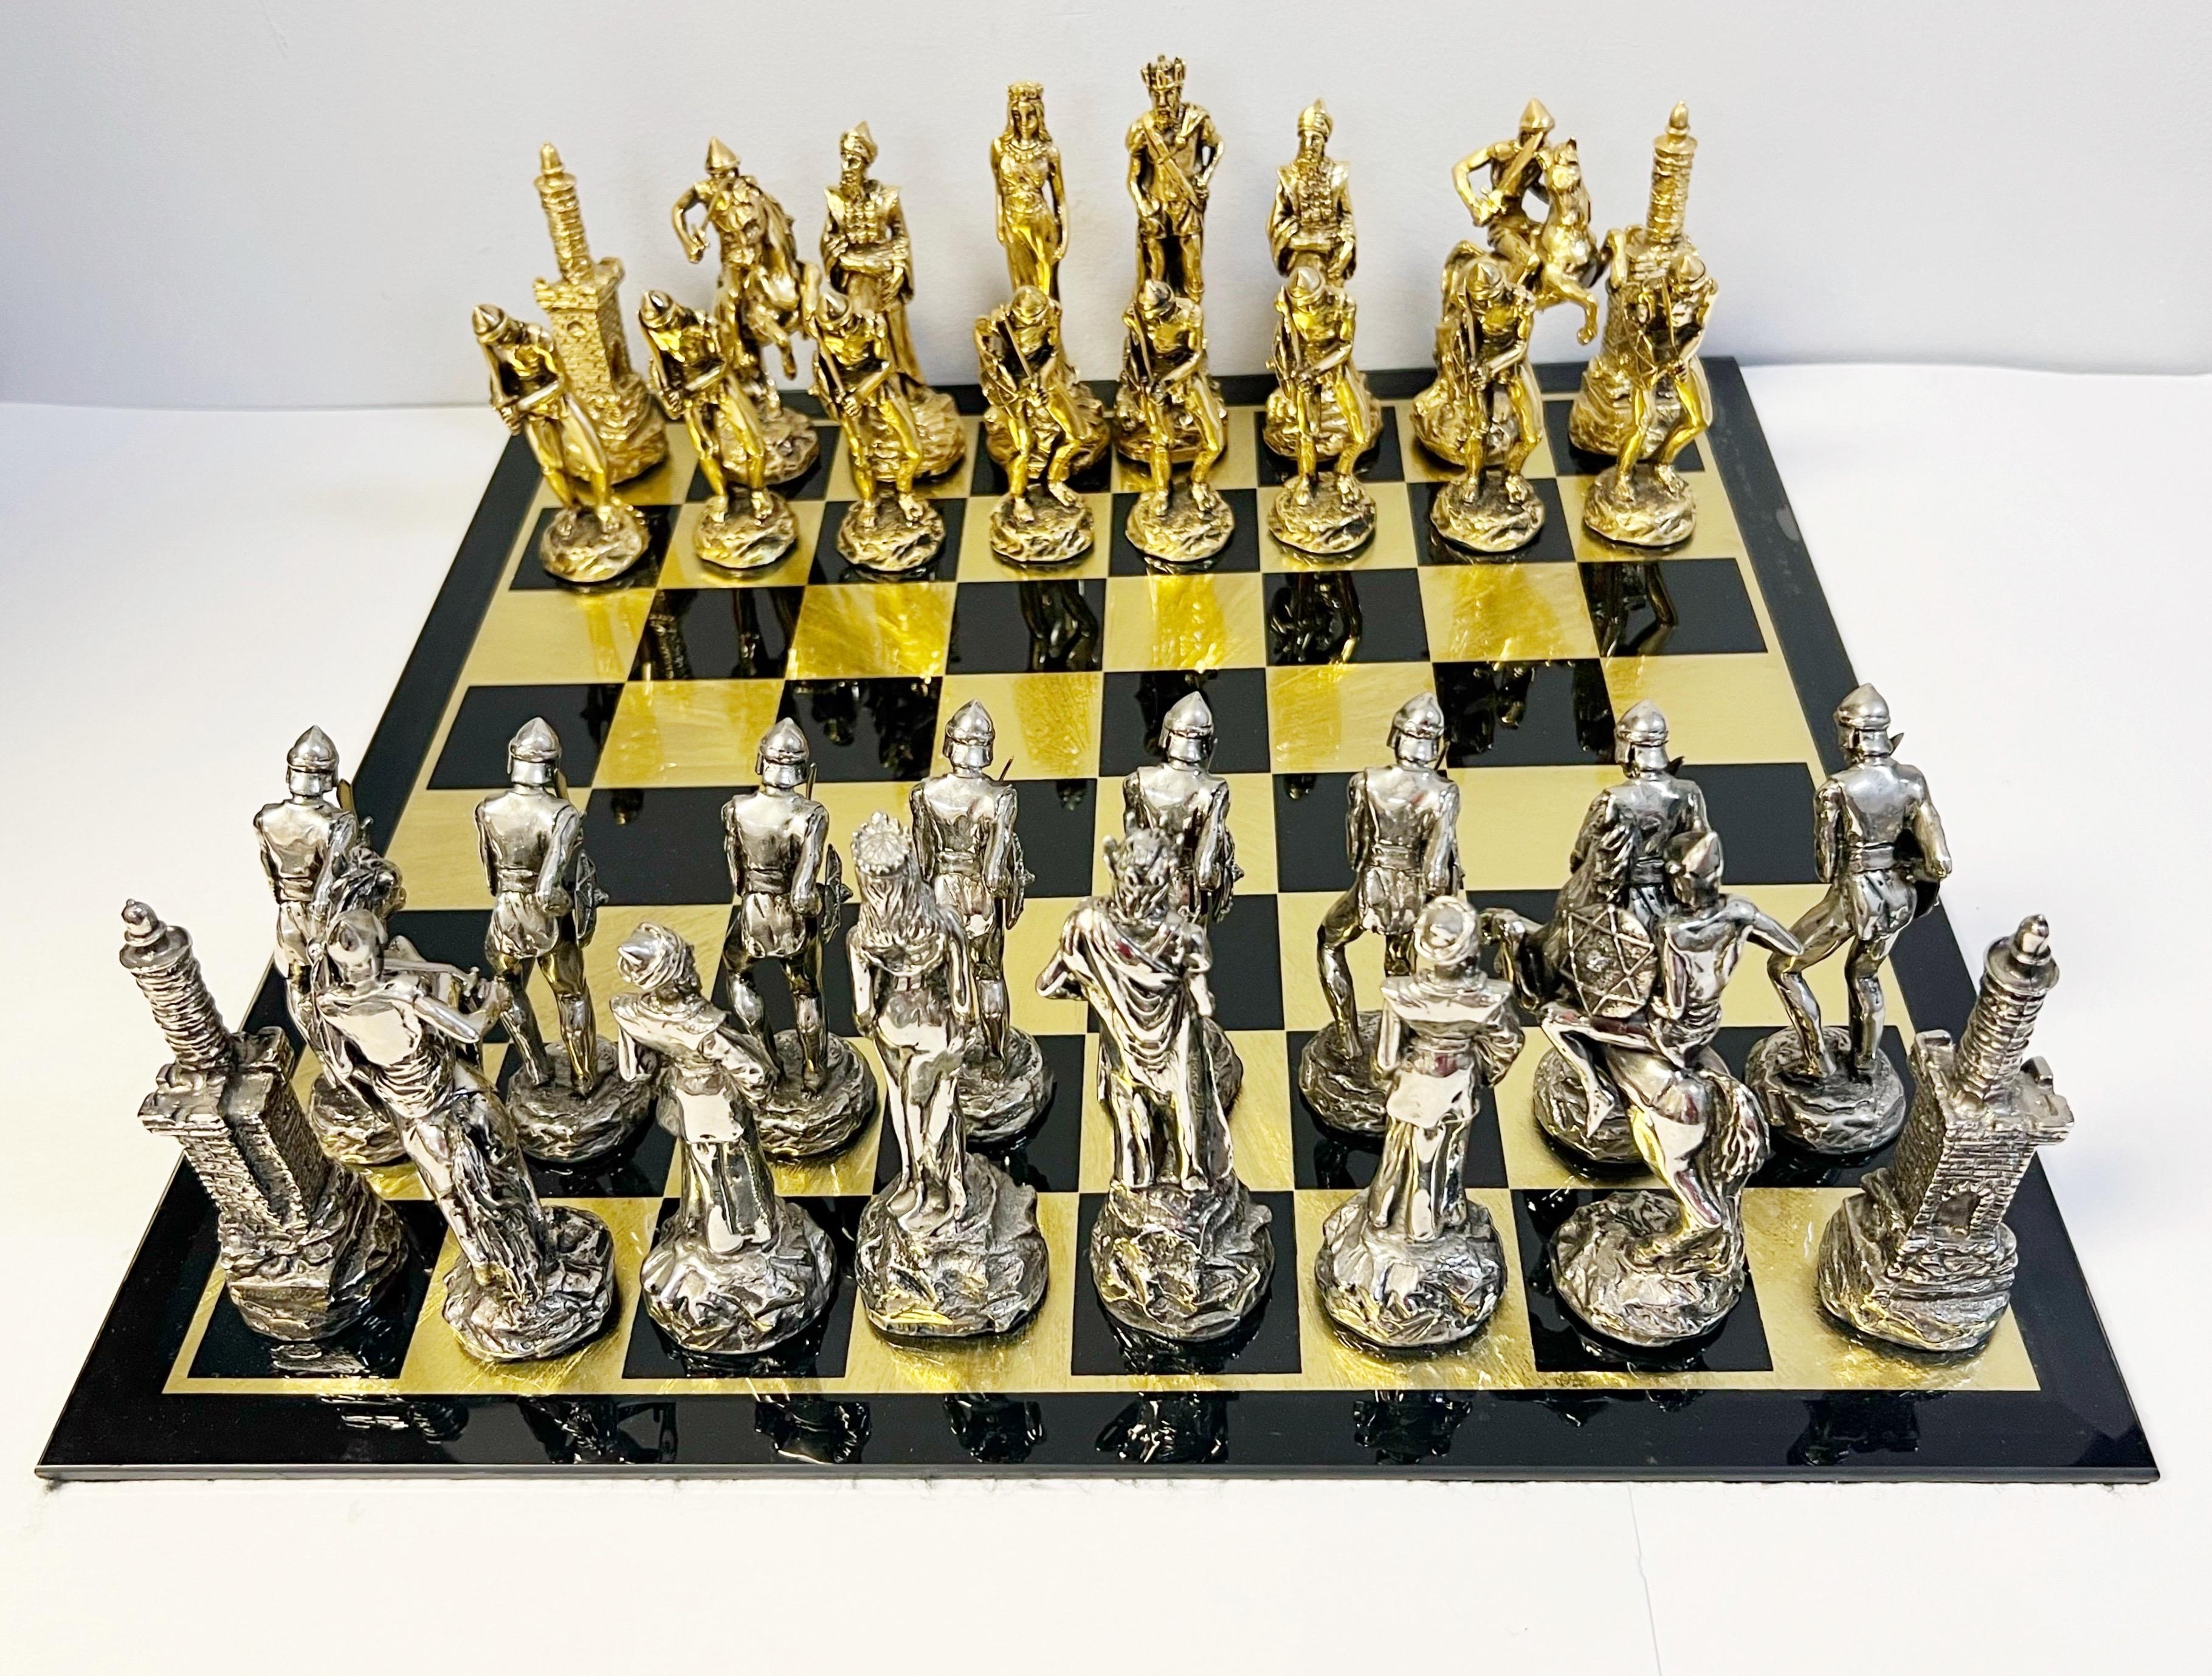 Spectacular chess set by Yaacov Heller. The sculptures are silver and gold over cast pewter. Fine detail. All pieces are signed. Retains original glass board. 